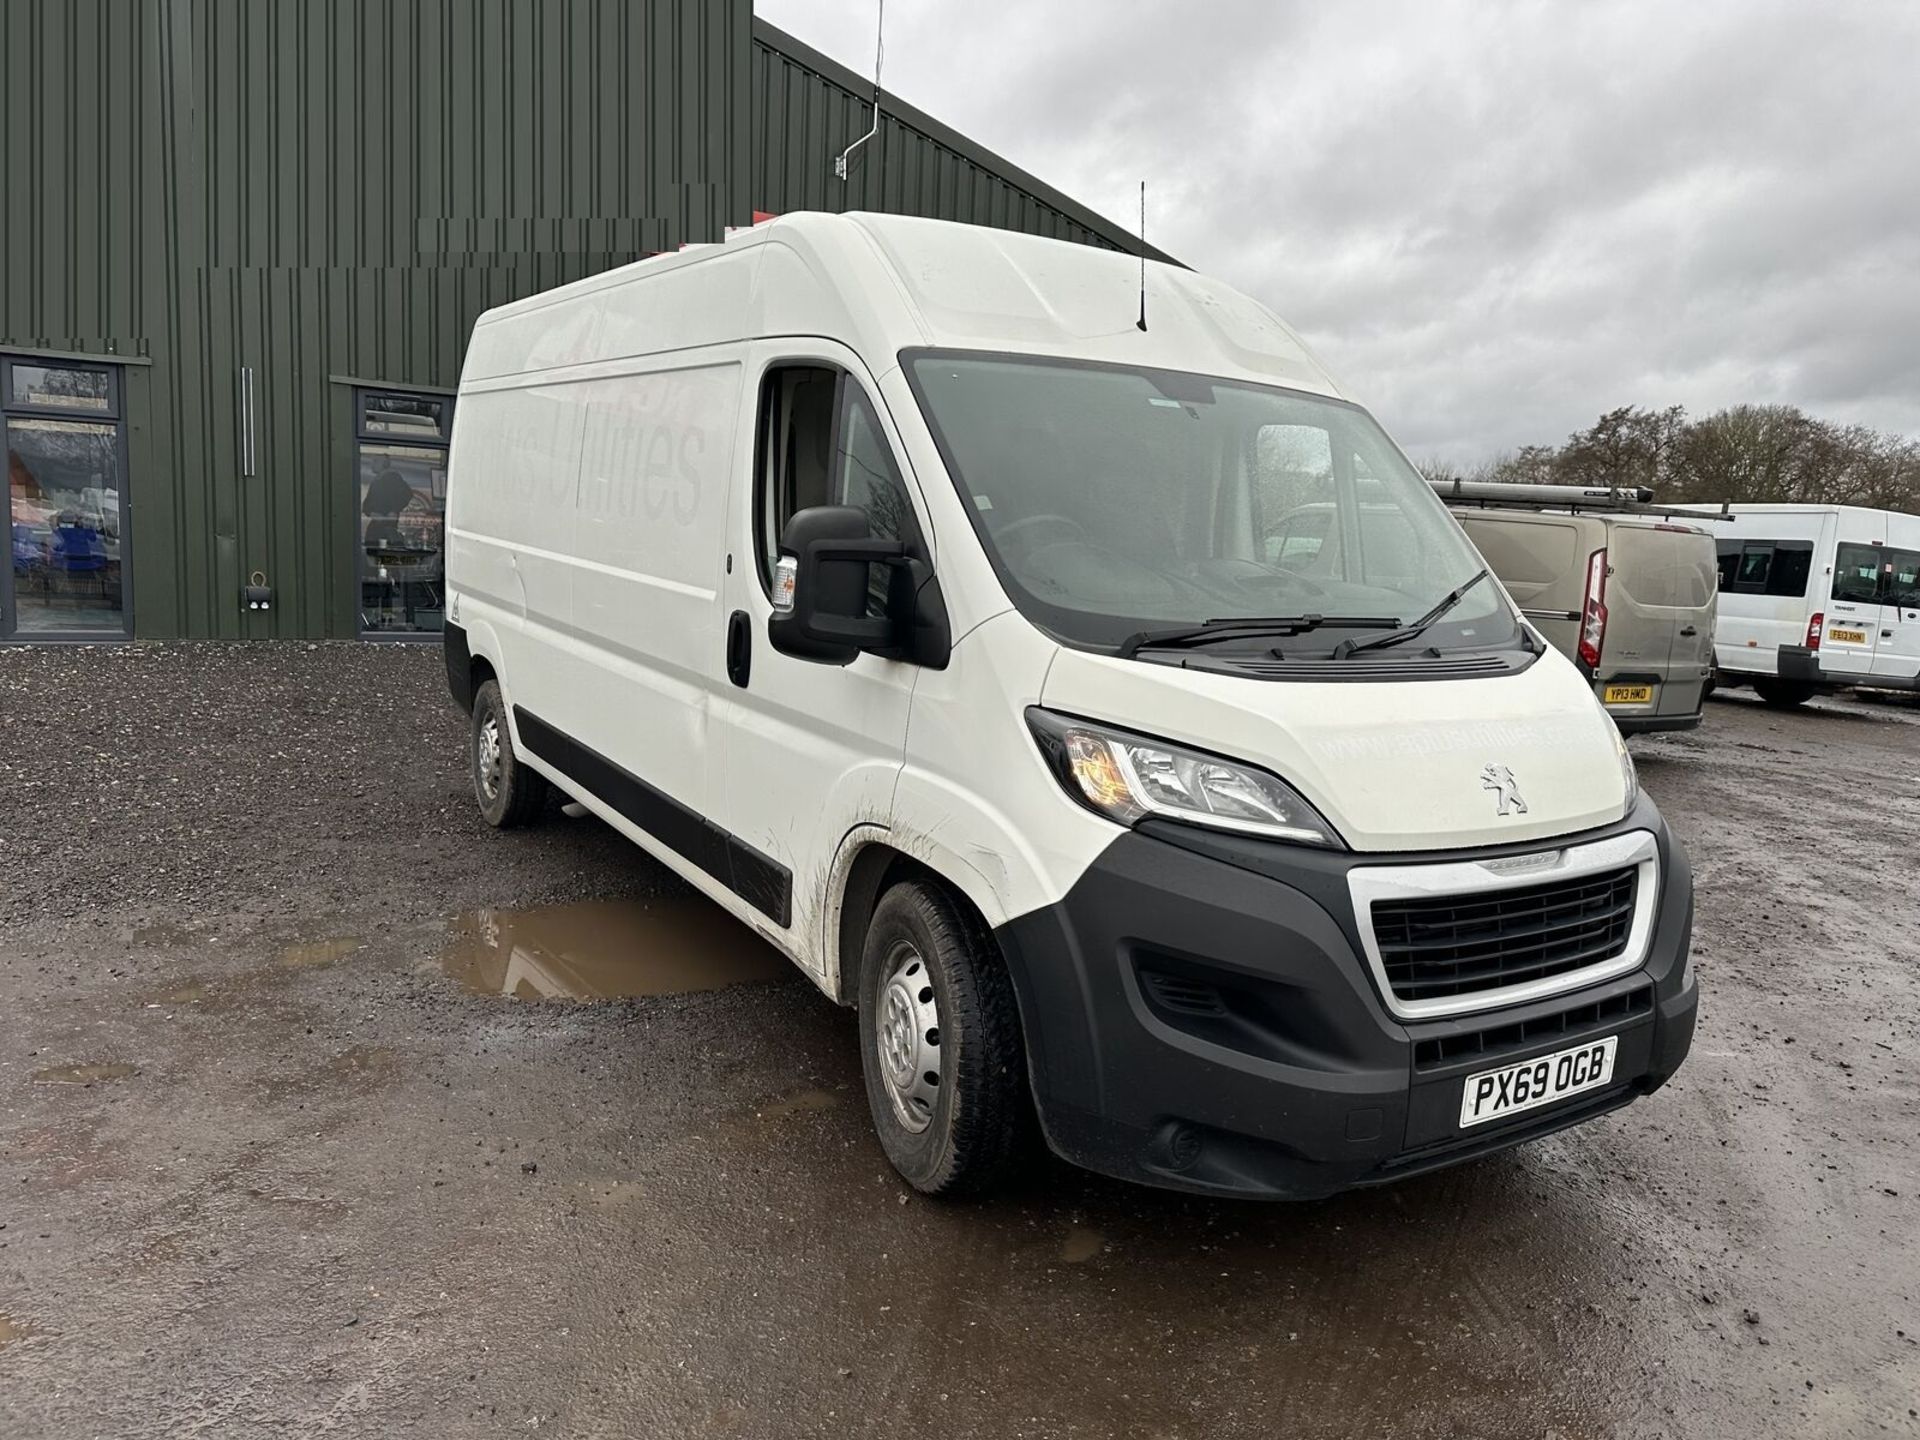 69 PLATE PEUGEOT BOXER: BLUE HDI POWER, READY FOR DUTY - Image 2 of 19